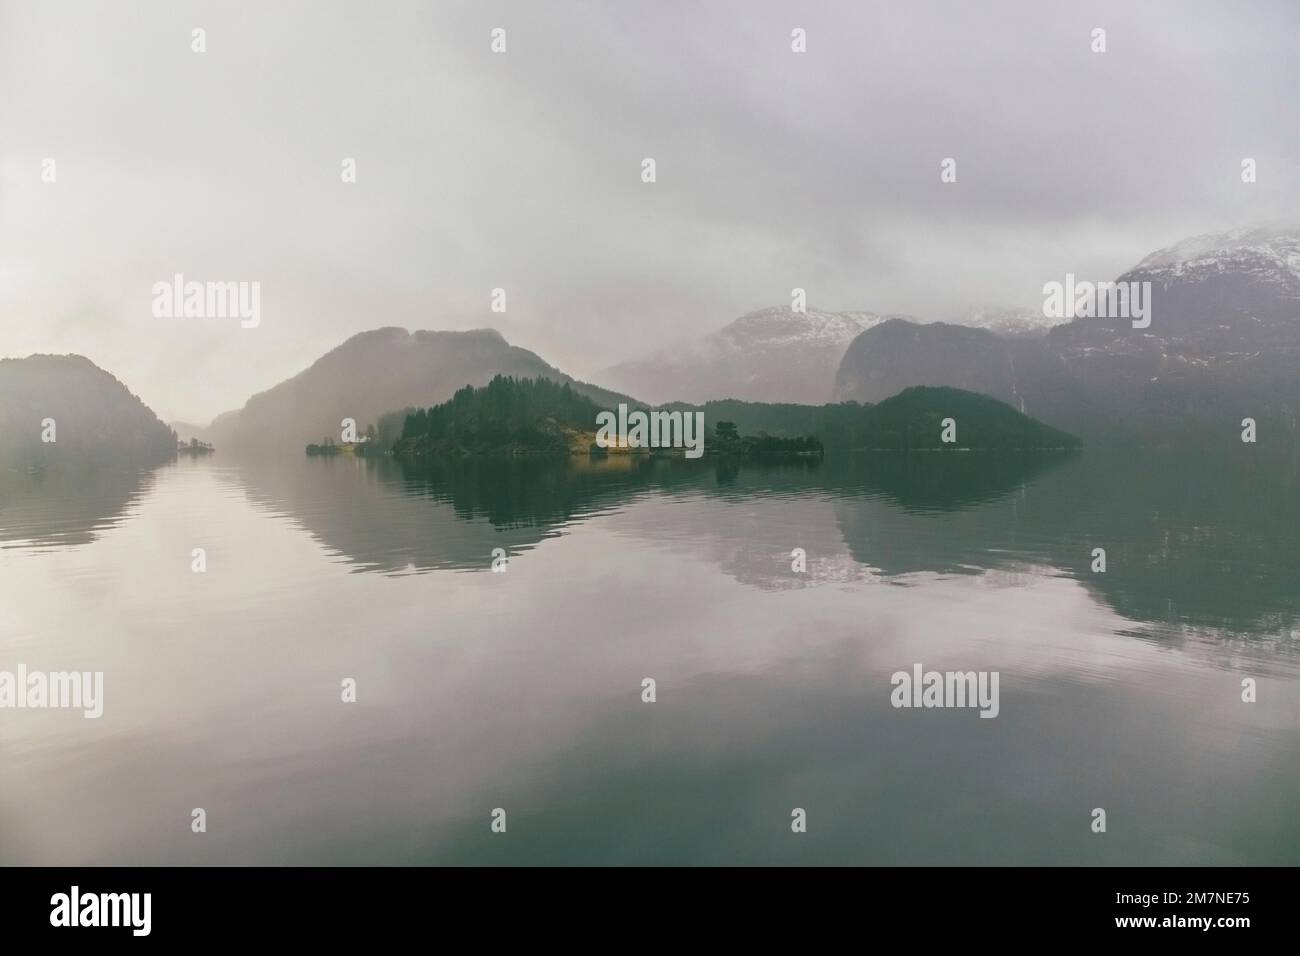 Lonely houses on an island in Norway, landscape with reflection in the water, fog and clouds, typical fjord landscape with small islands, isolation from the outside world, central perspective Stock Photo